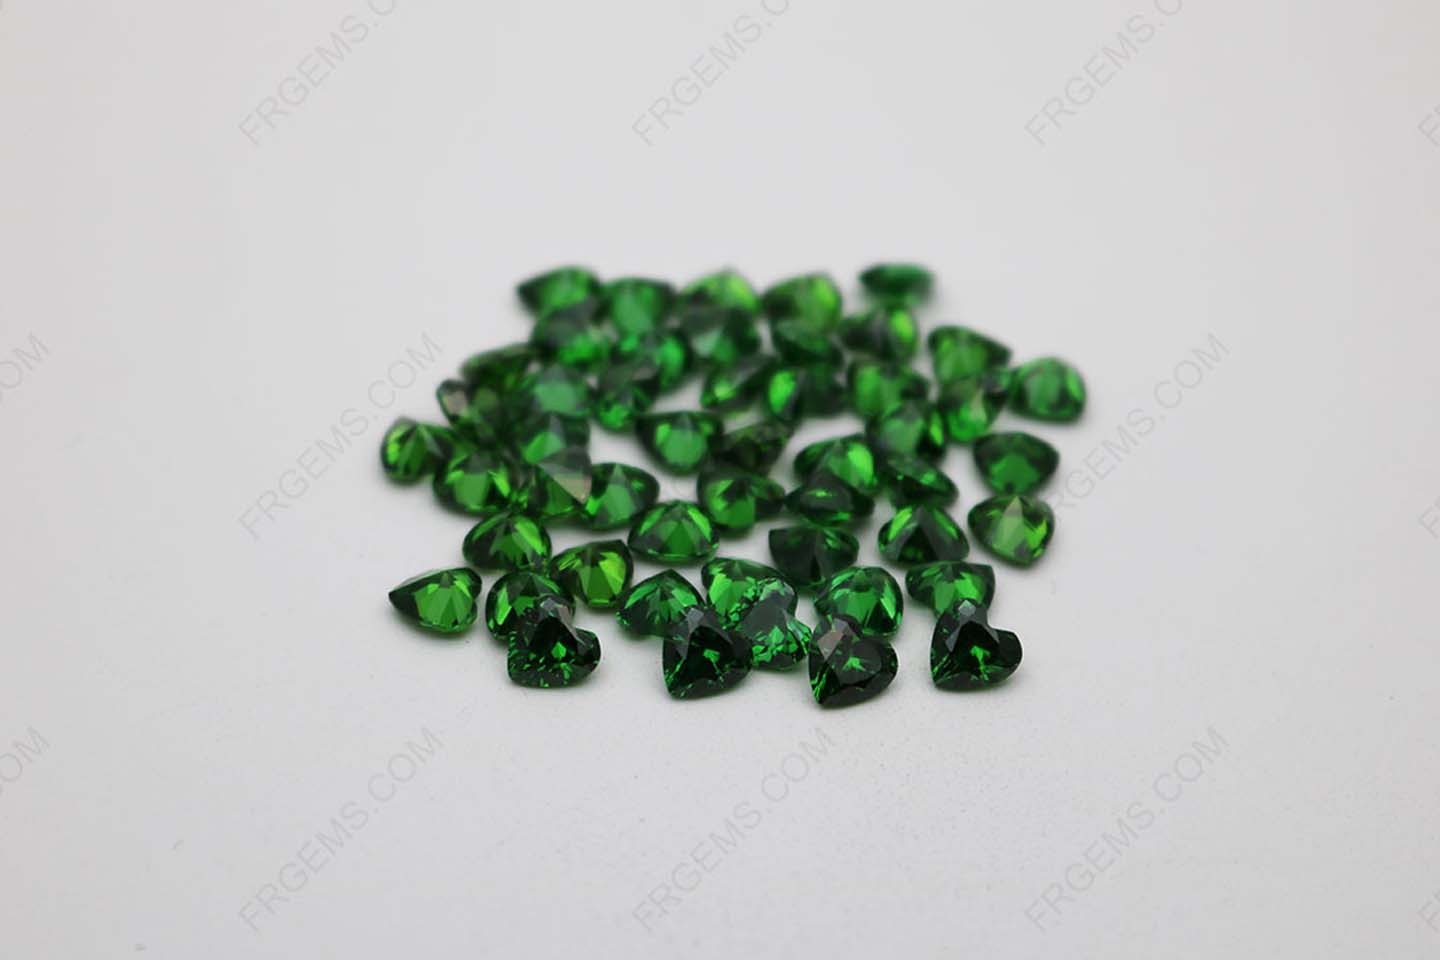 Cubic Zirconia Green Heart Shape Faceted Cut 6x6mm stones CZ35 IMG_1326